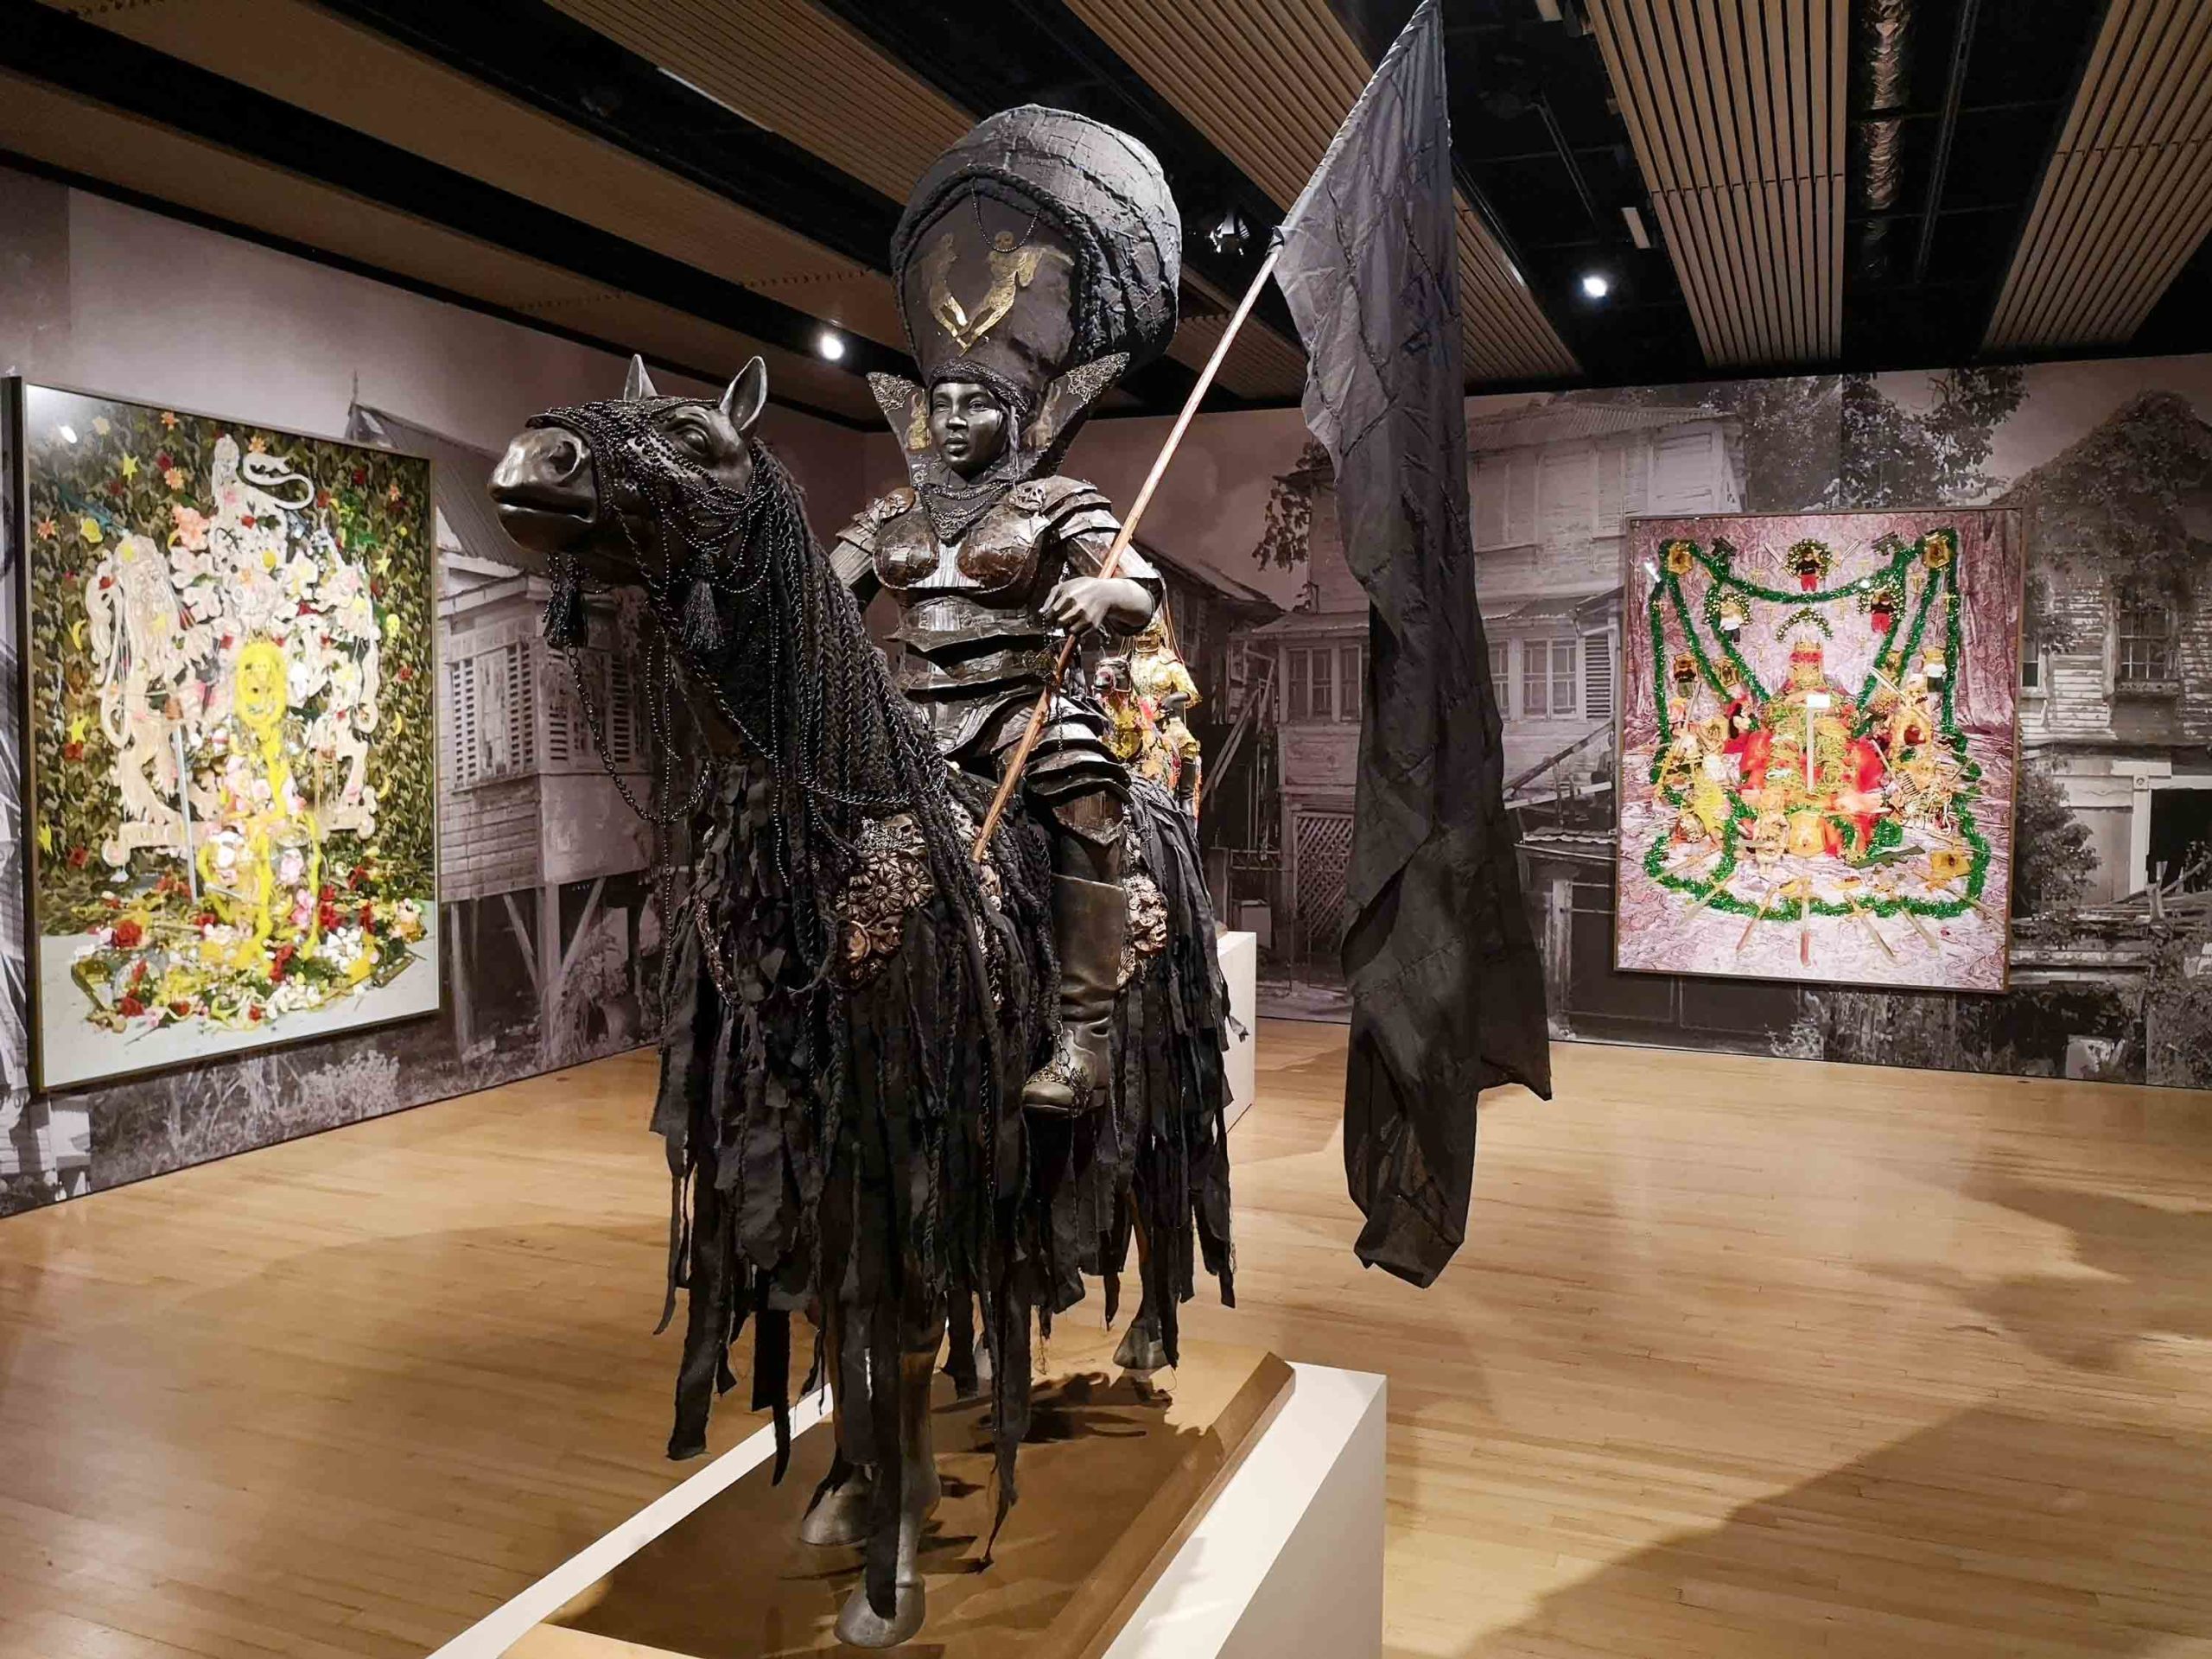 In a dark gallery with images on the walls. A plinth holds the statue of a black-clad figure on a black horse. The figure holds a black flag and is dressed in figure-hugging armour-like clothing, and a large bulbous head covering.